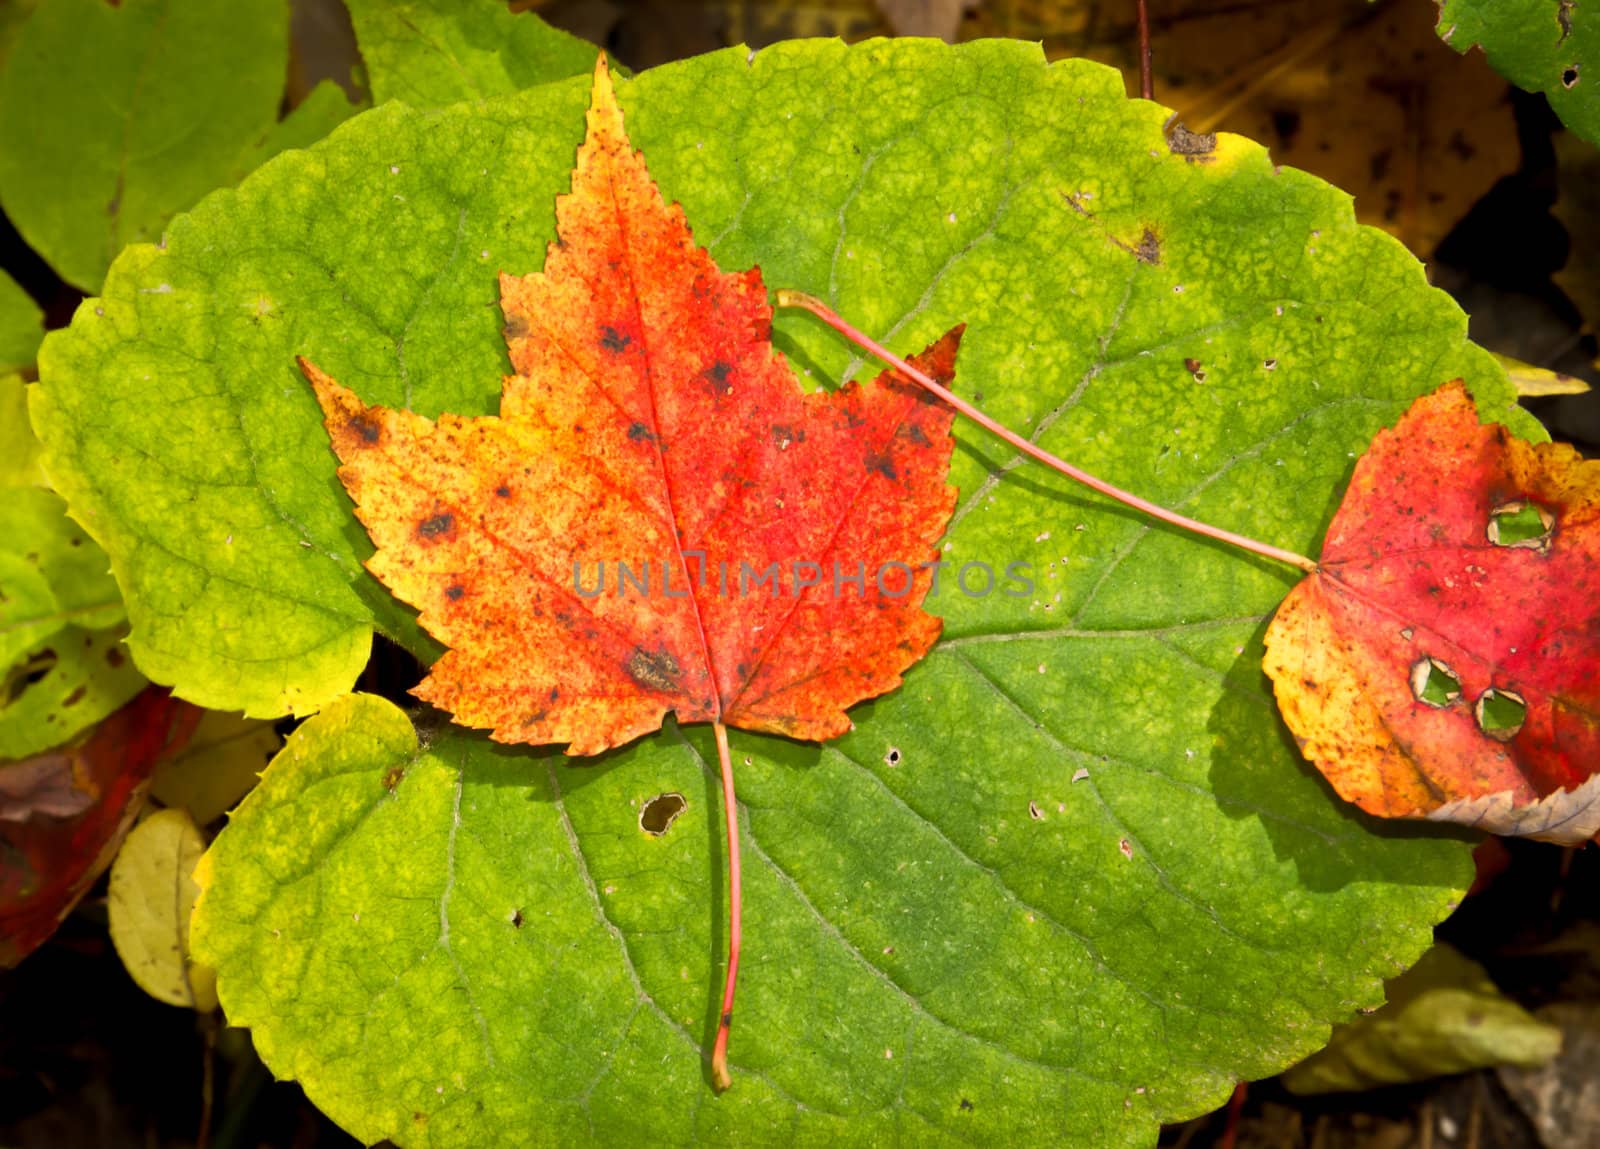 A crimson fallen Maple leaf rests atop foliage of the forest floor.